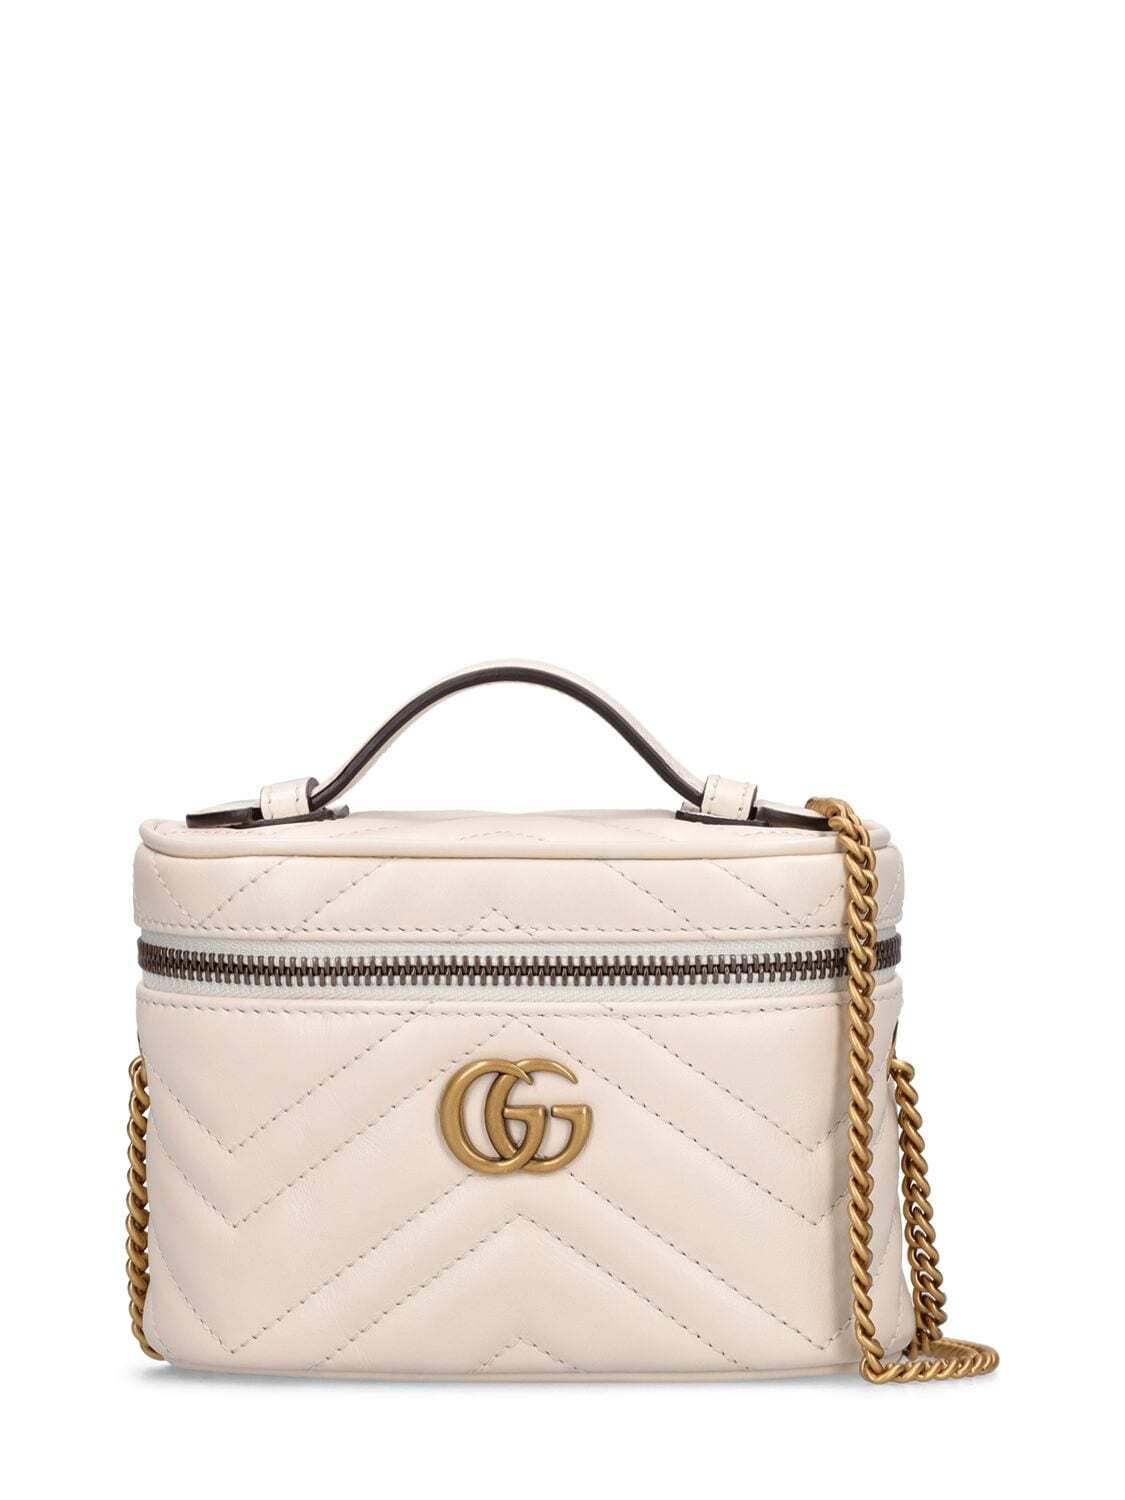 GUCCI Gg Marmont Leather Cosmetic Bag in white